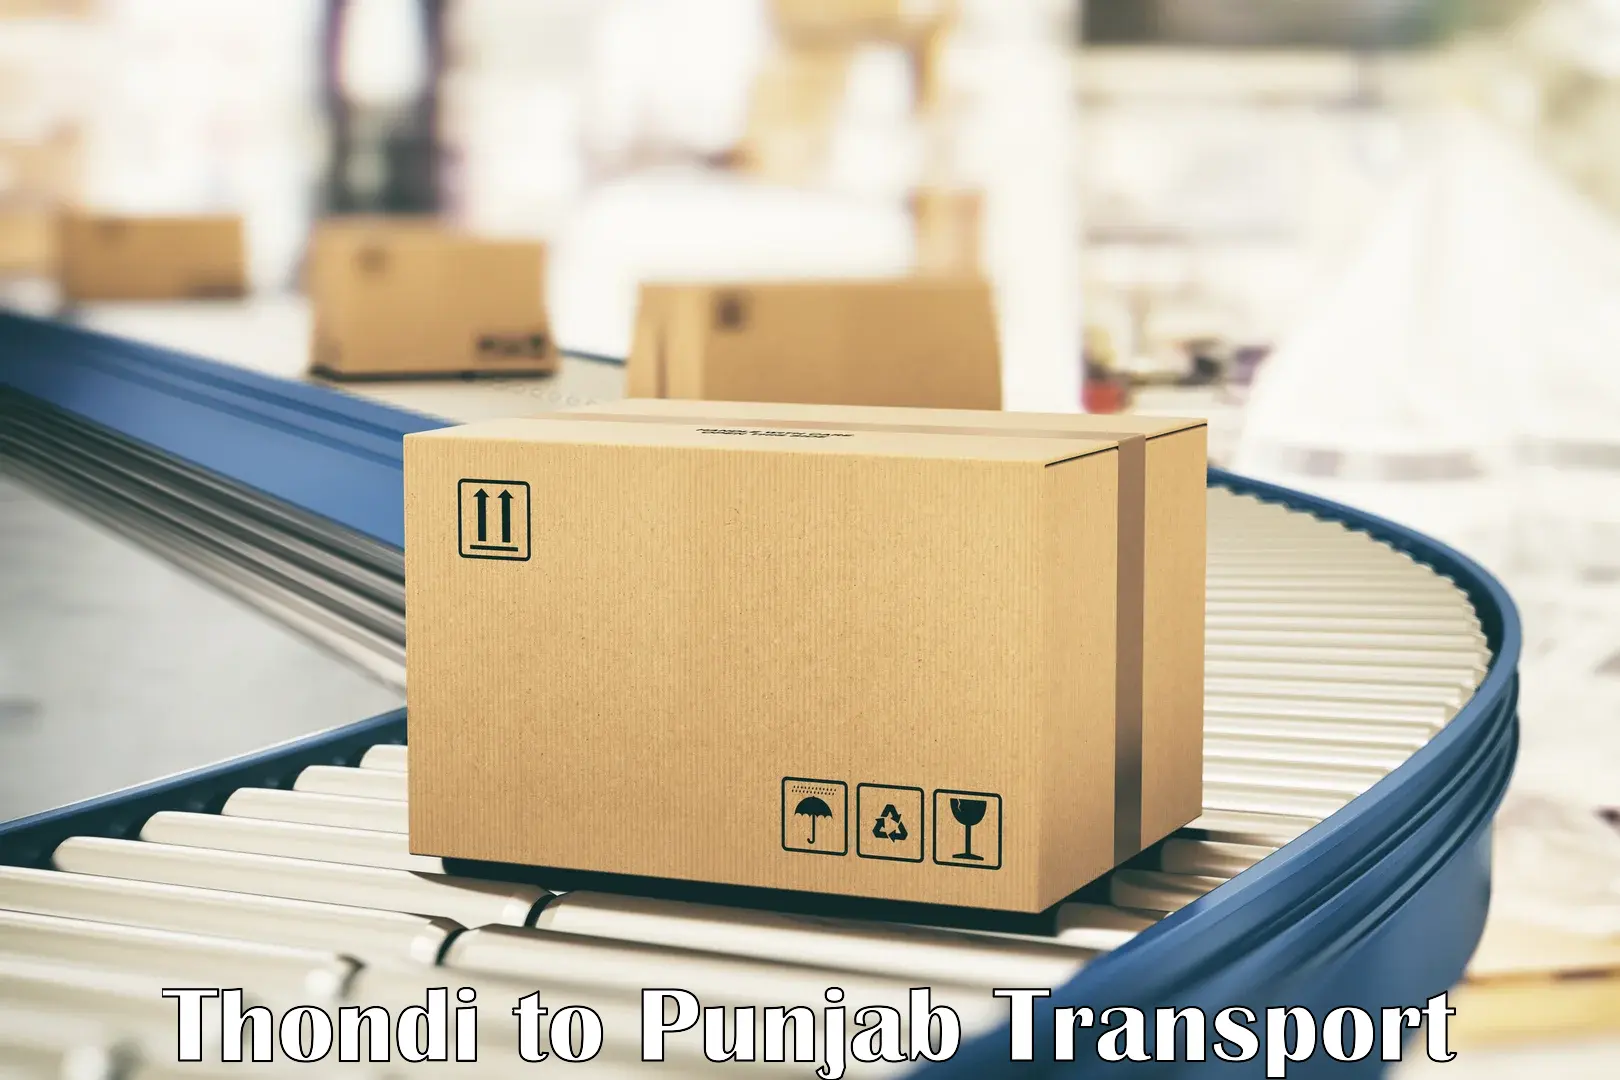 Express transport services Thondi to Patiala